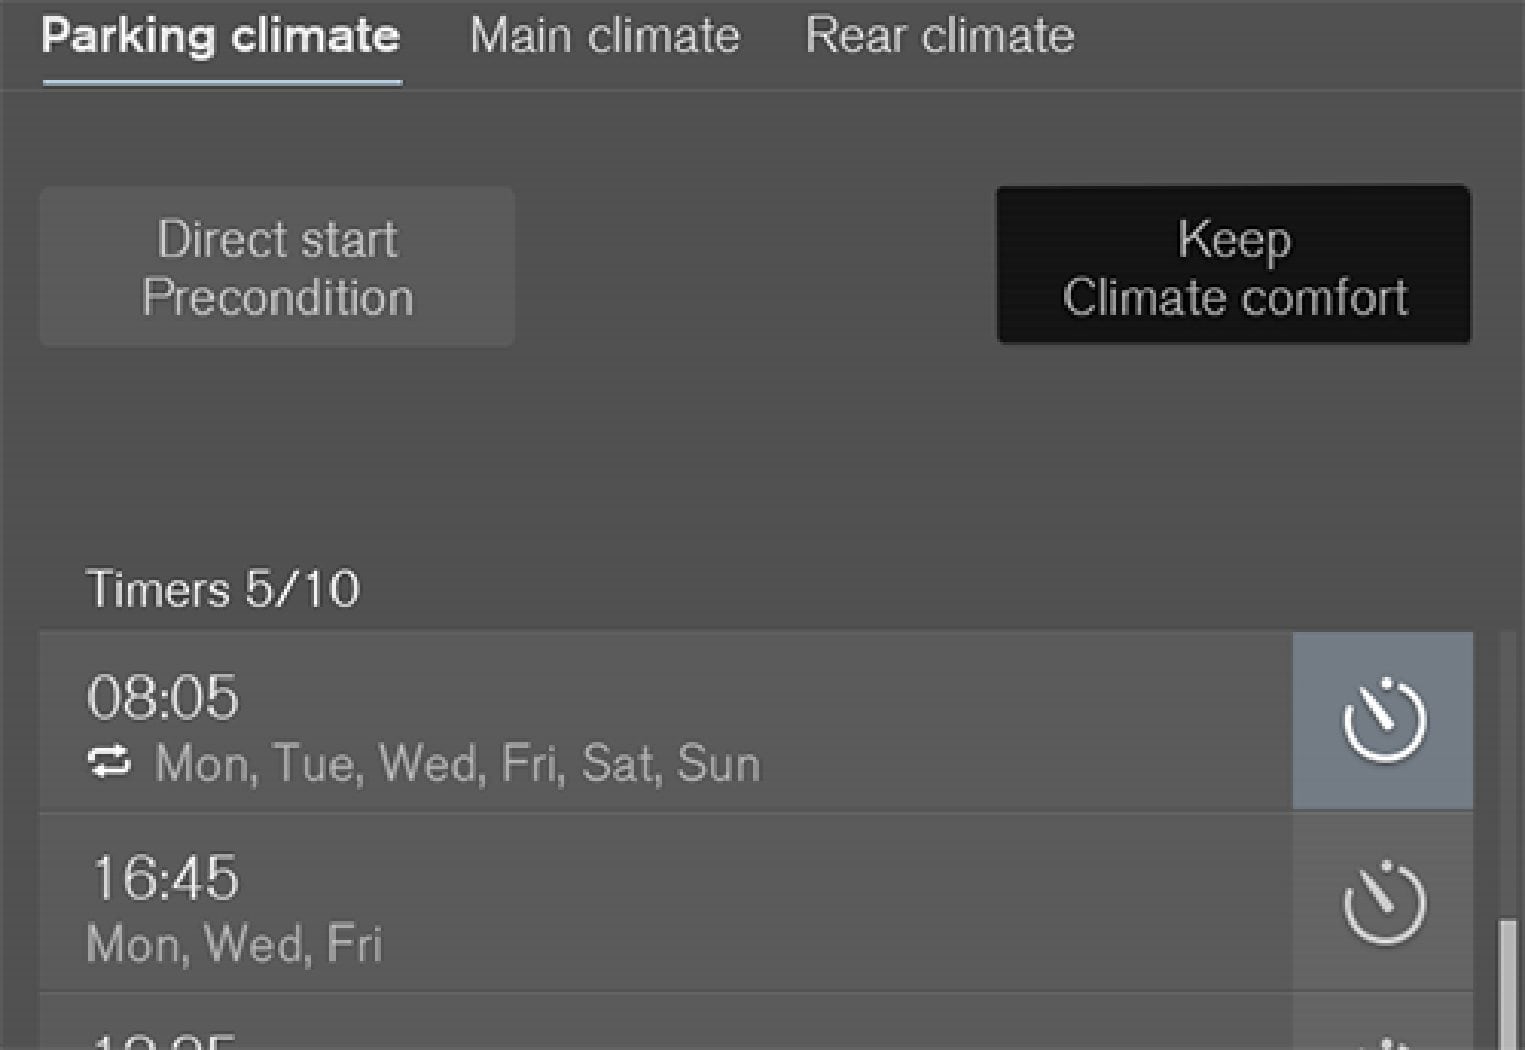 Button for climate comfort retention in the Parking climate  tab in the climate view.